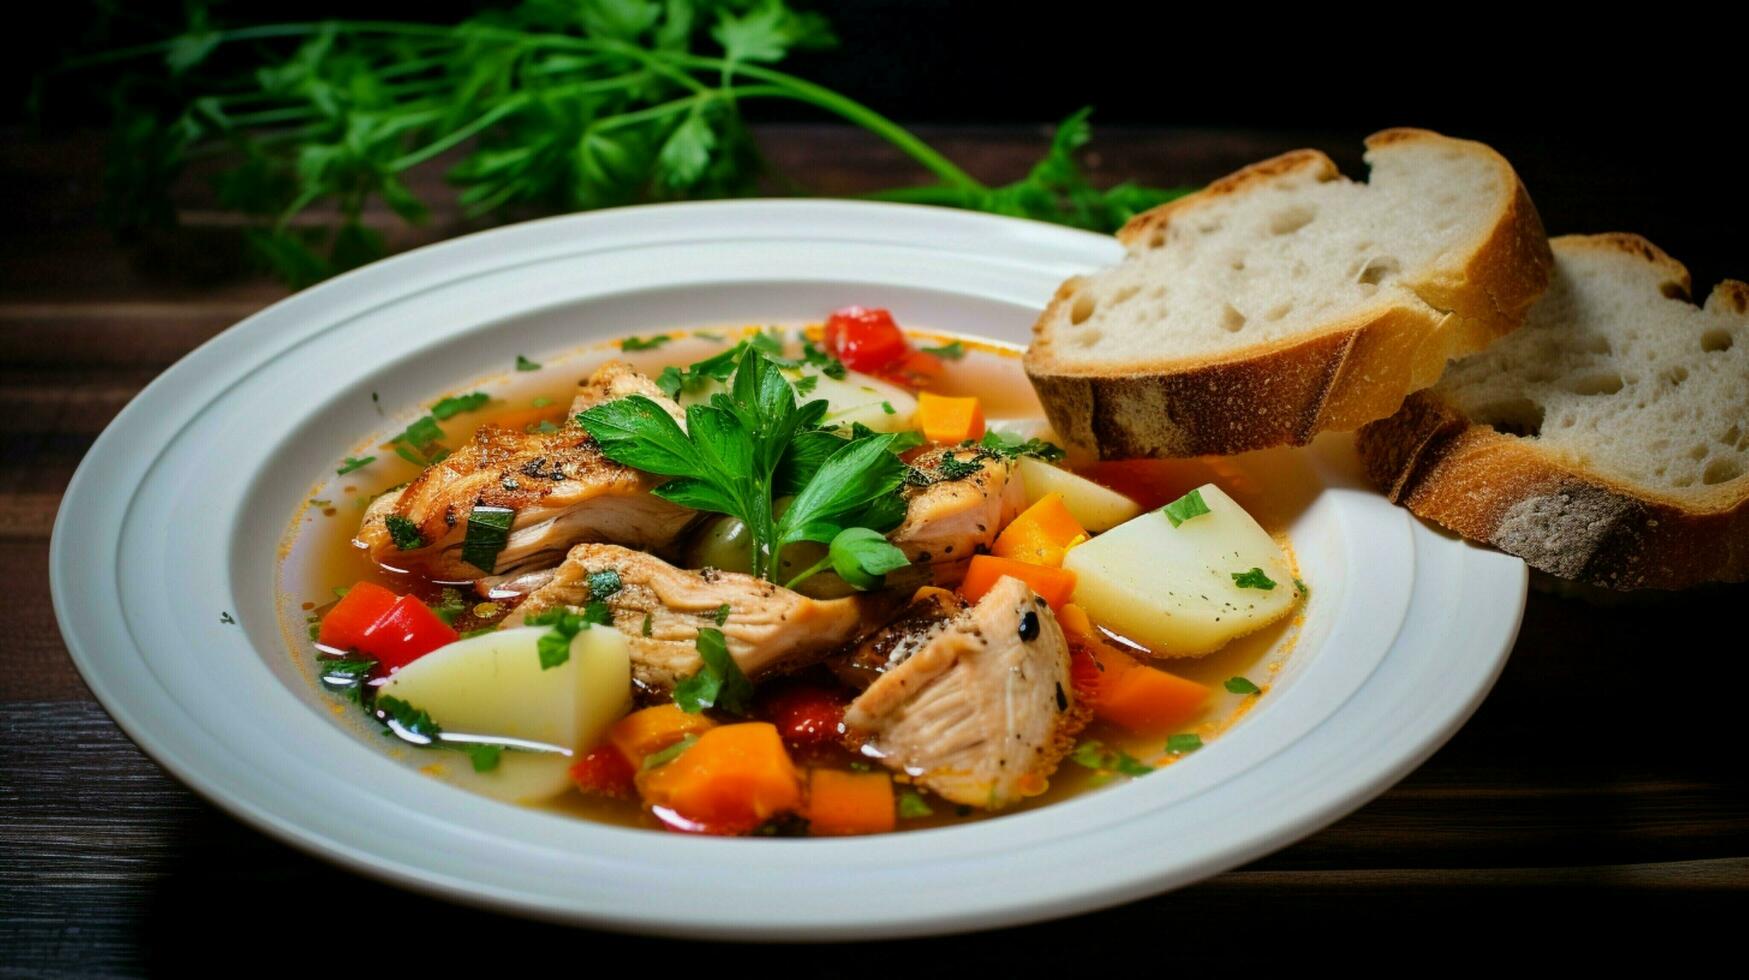 healthy eating cooked meat vegetable soup fresh grilled photo